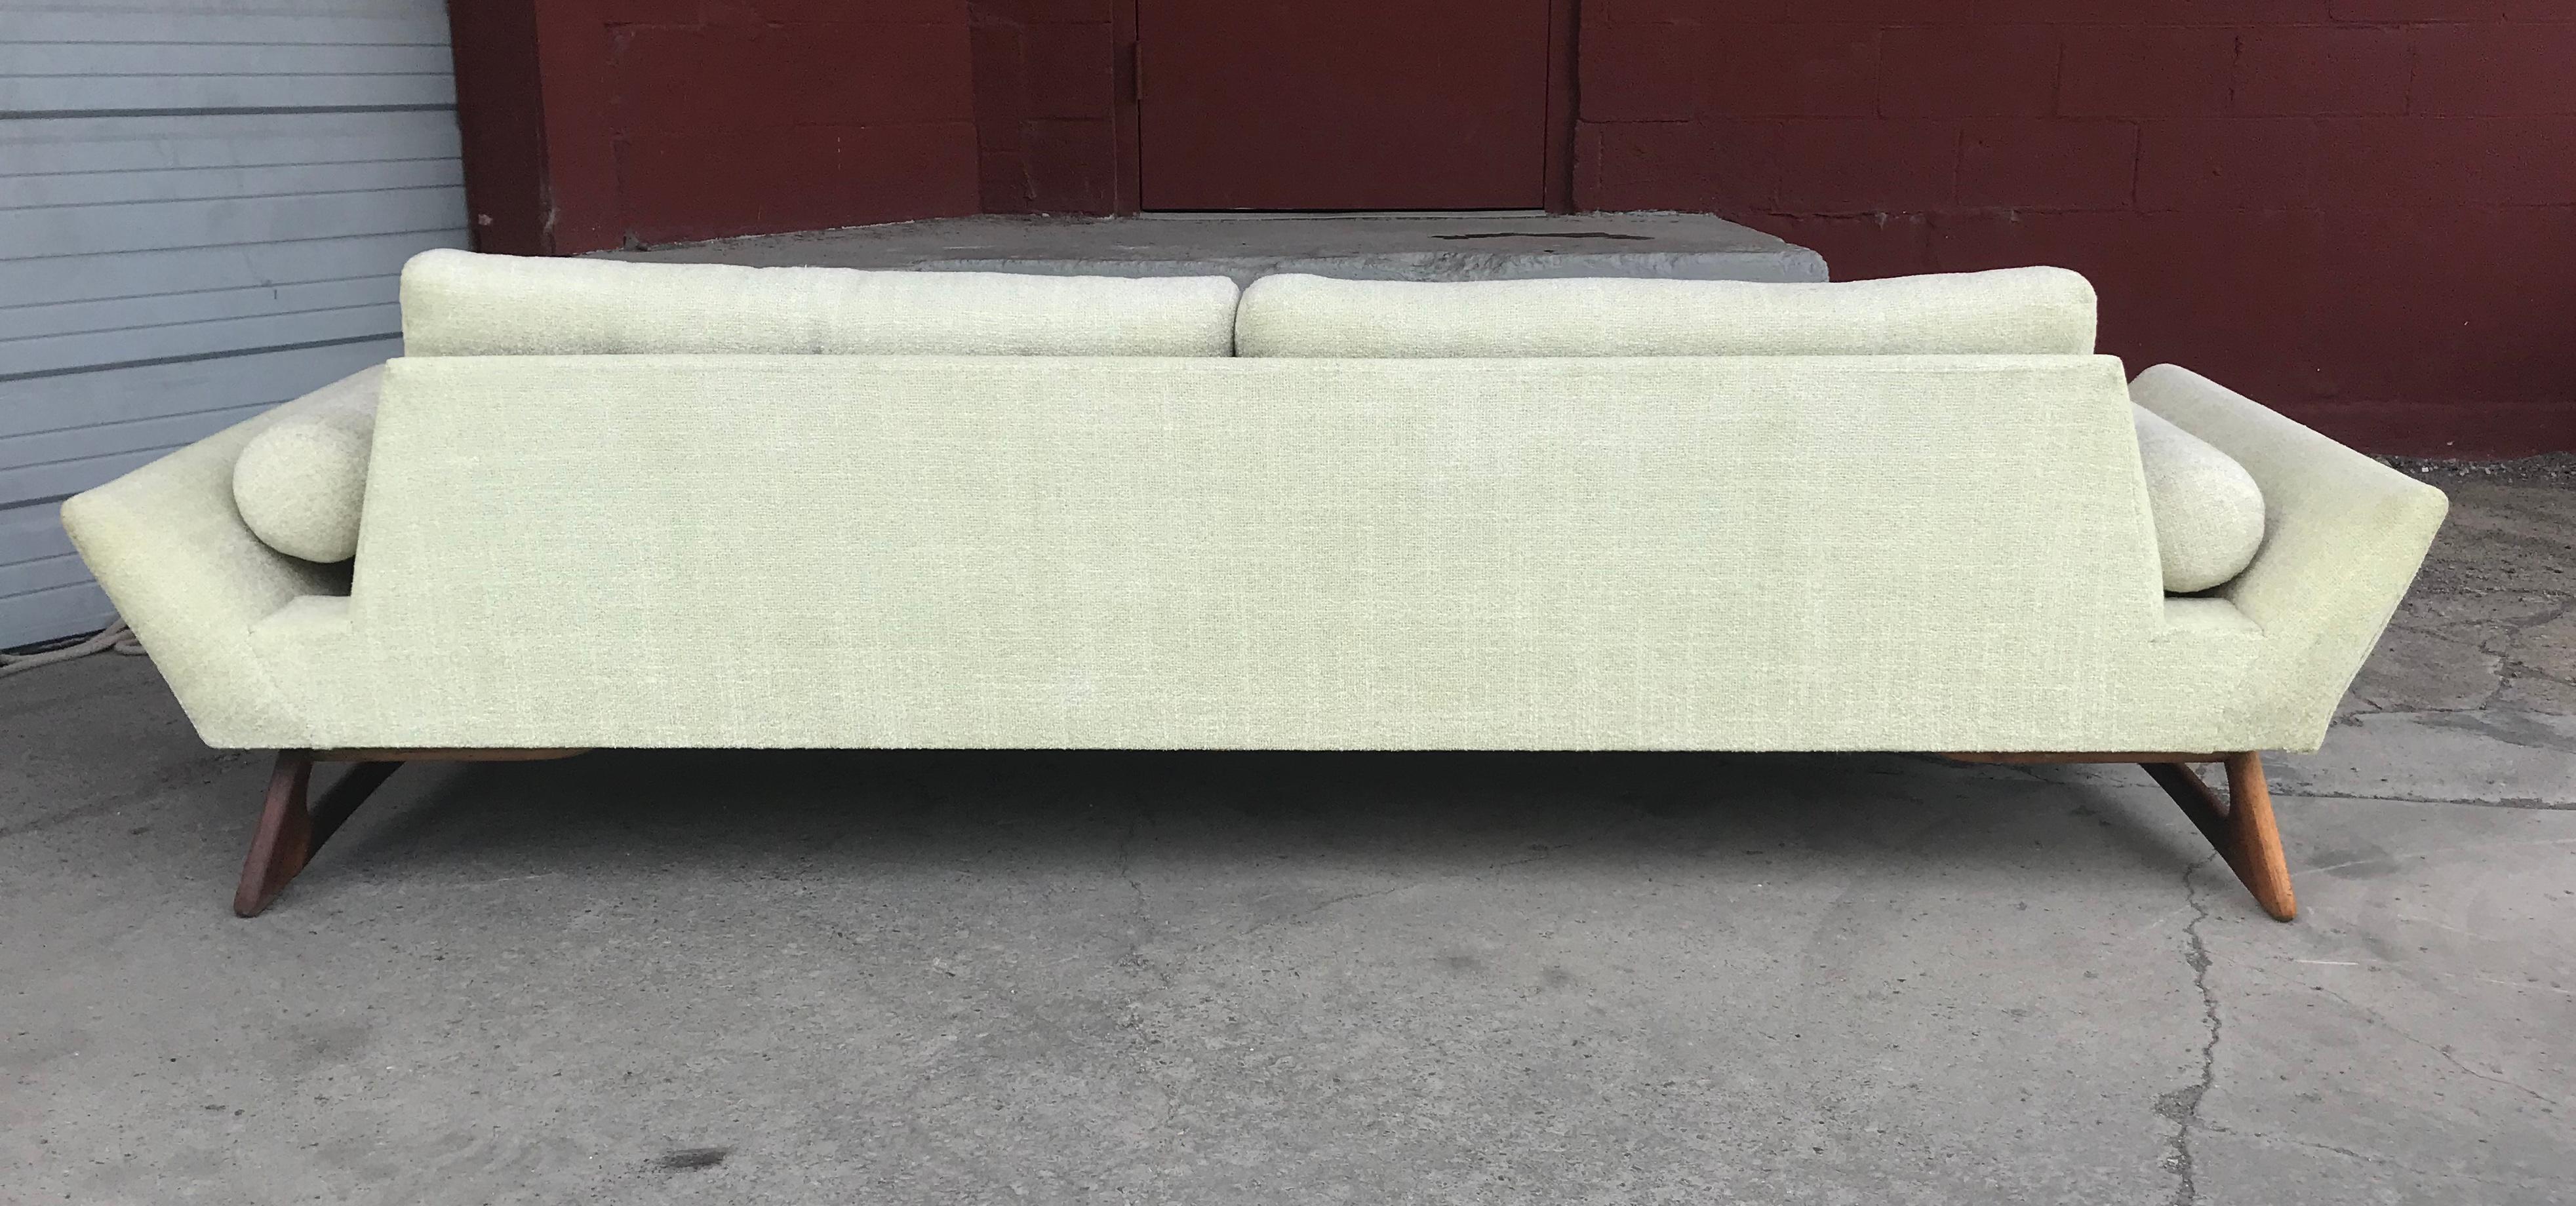 Classic Mid-Century Modern Sofa Designed by Adrian Pearsall, Stunning 1